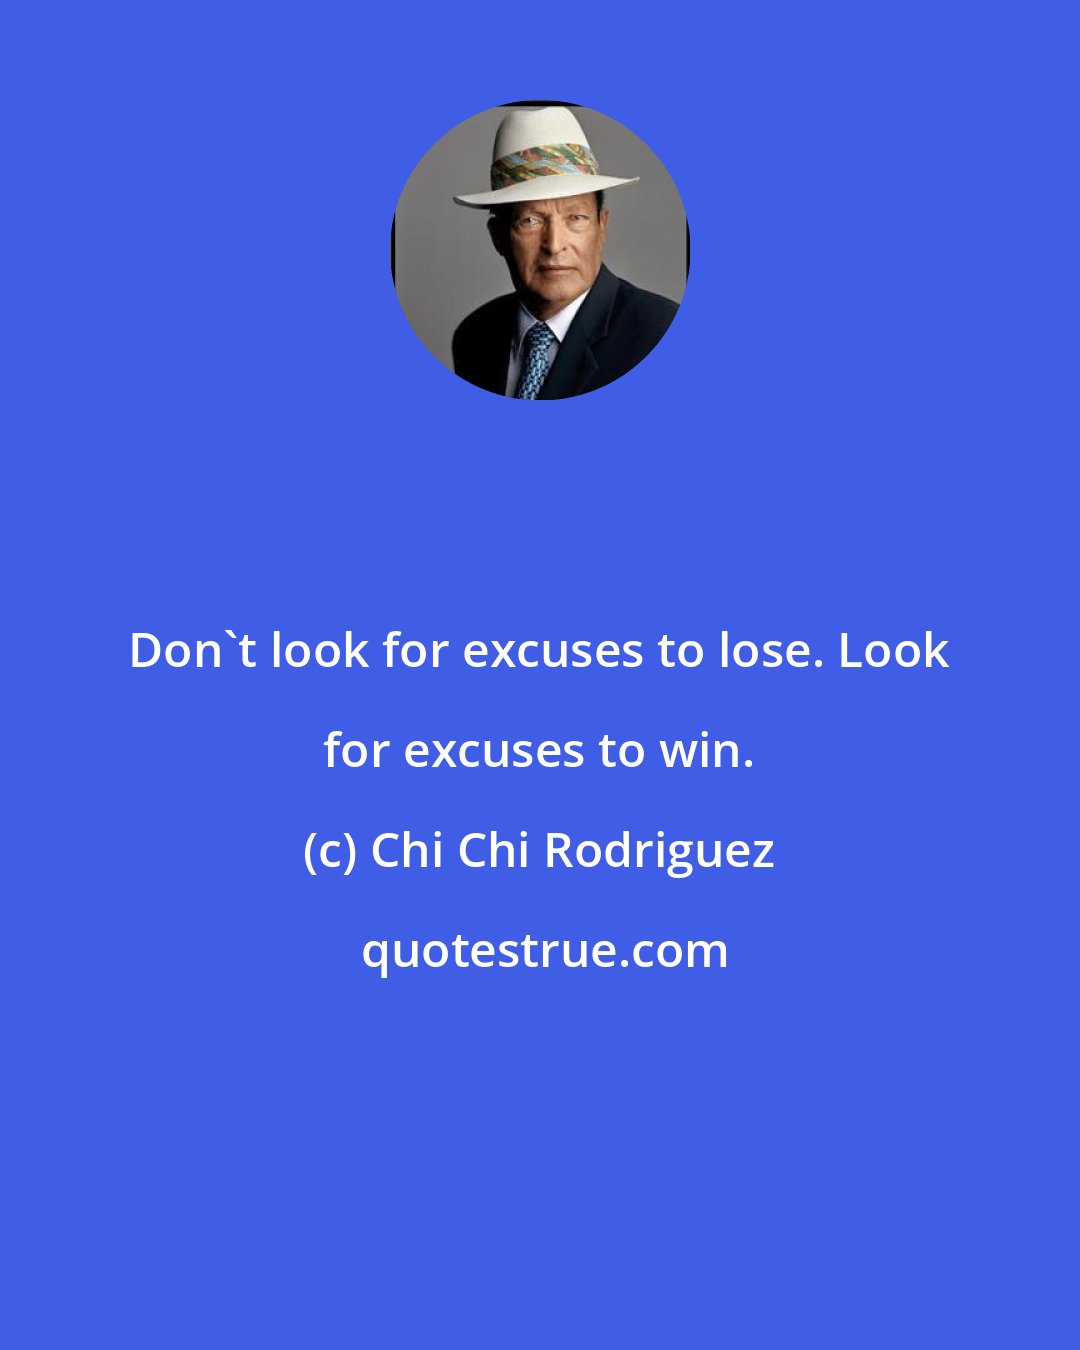 Chi Chi Rodriguez: Don't look for excuses to lose. Look for excuses to win.